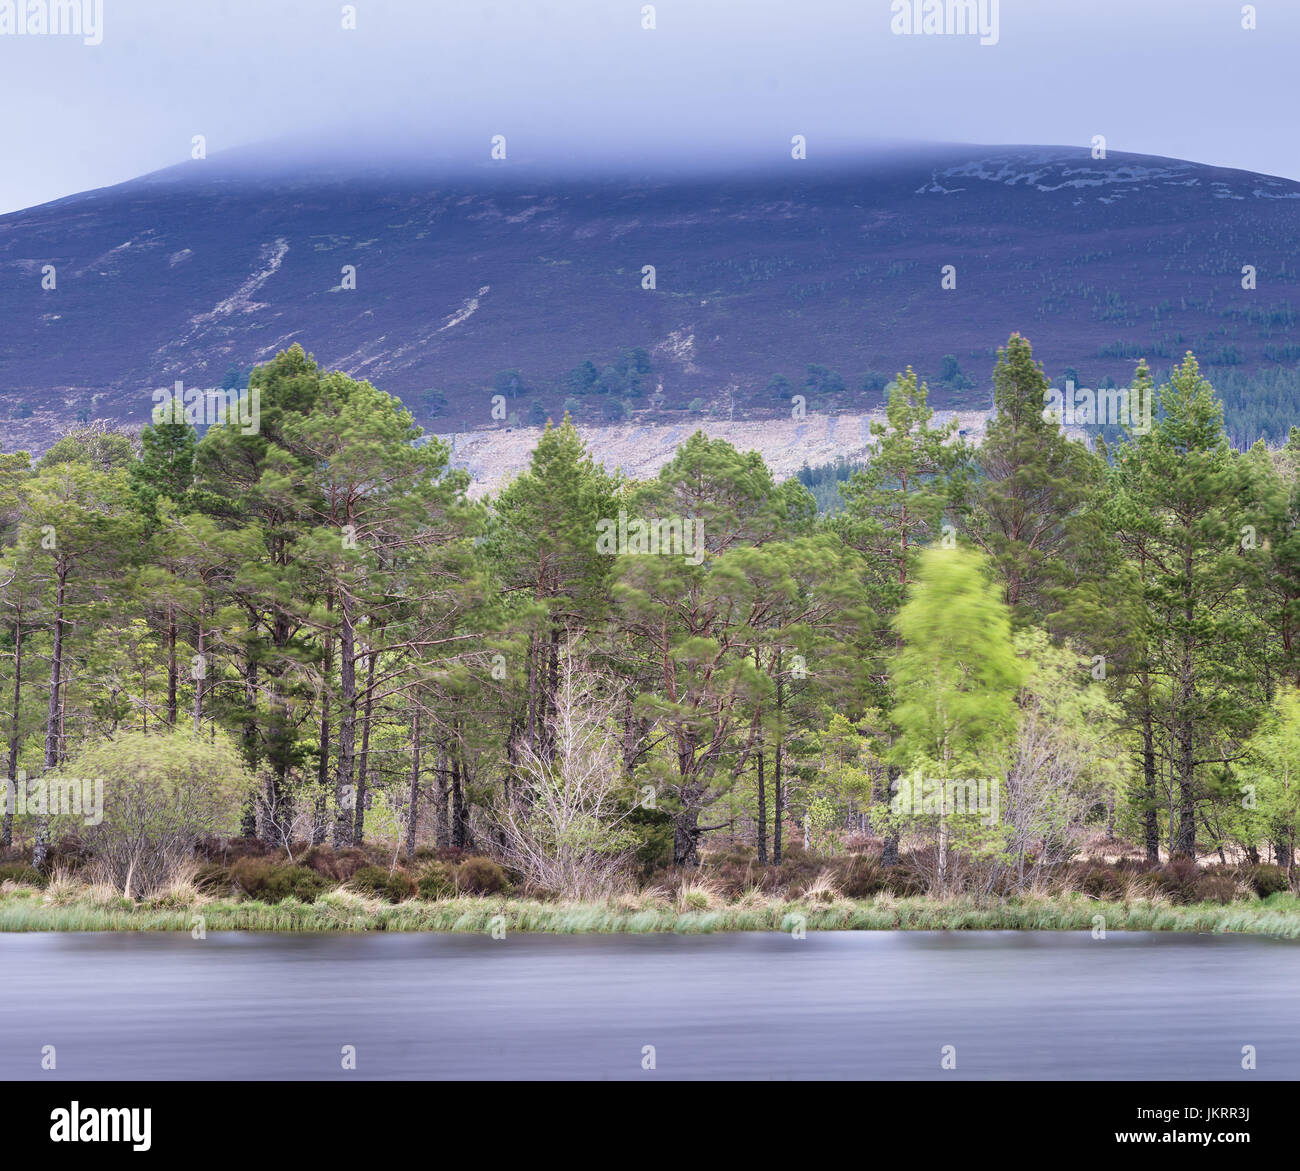 A landscape view of the Cairngorm National Park from across the water of Loch Morlich in the Highlands of Scotland Stock Photo